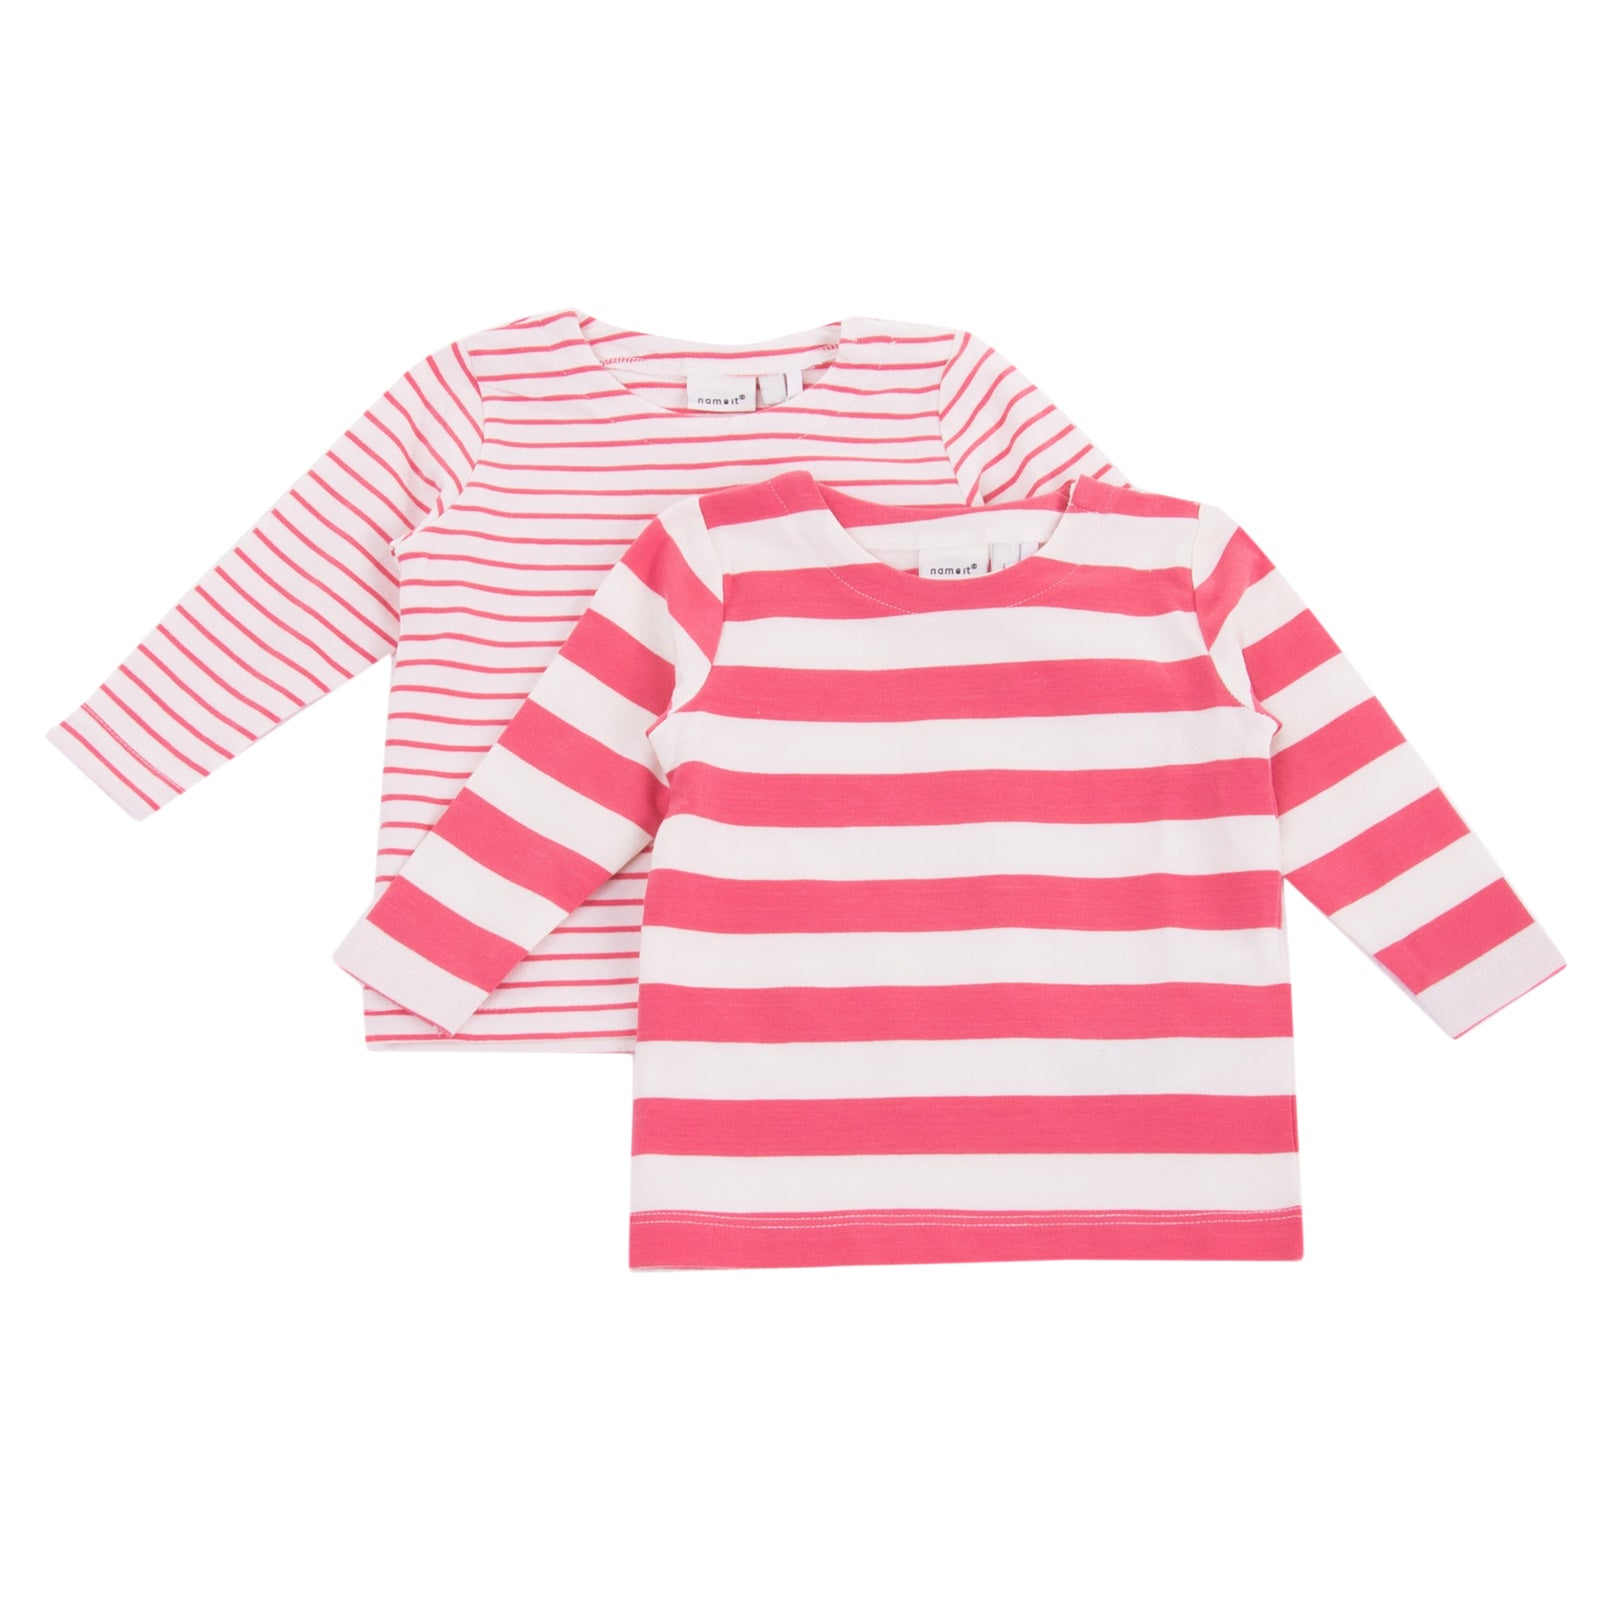 NAME IT T-Shirt Top Set Size 2-4M / 62CM Striped Pattern Long Sleeve Round Neck gallery main photo